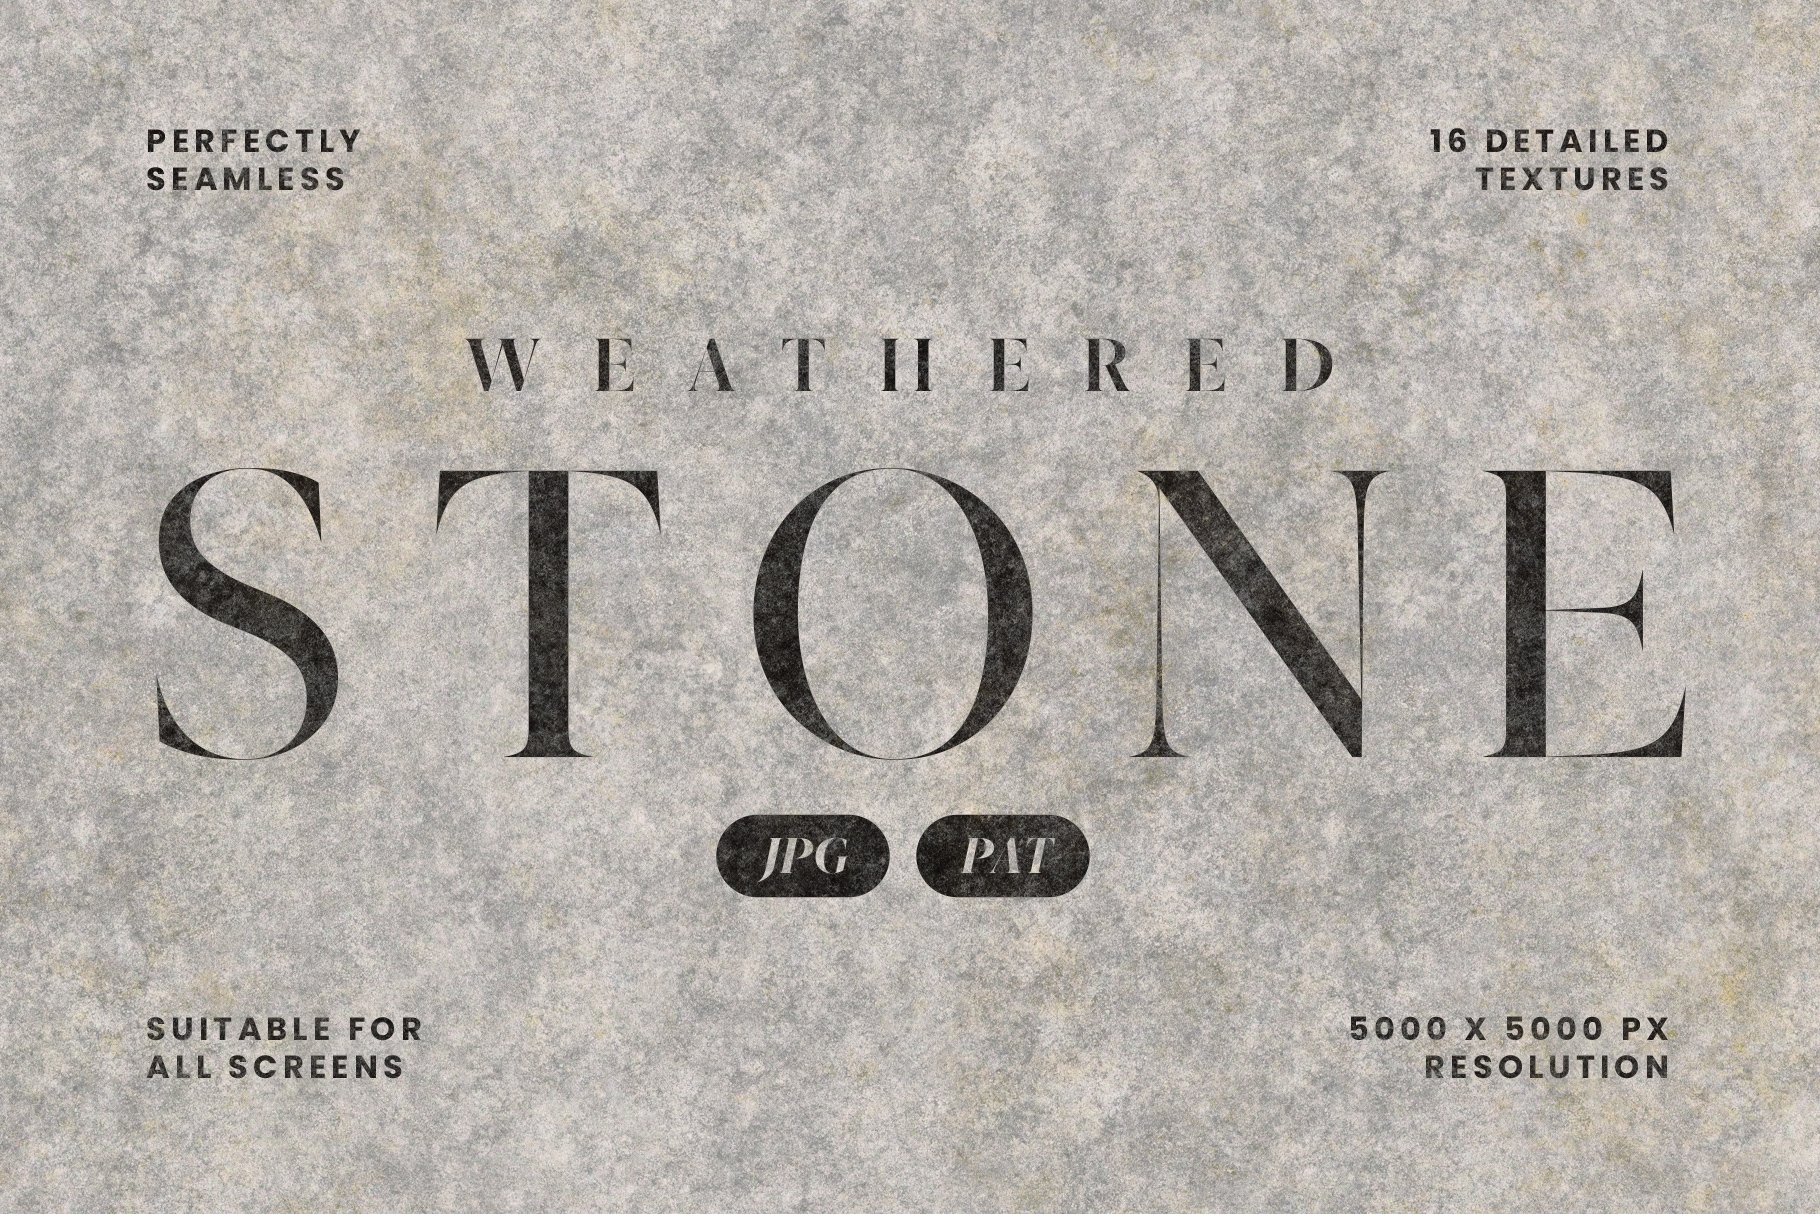 Seamless Weathered Stone Textures cover image.